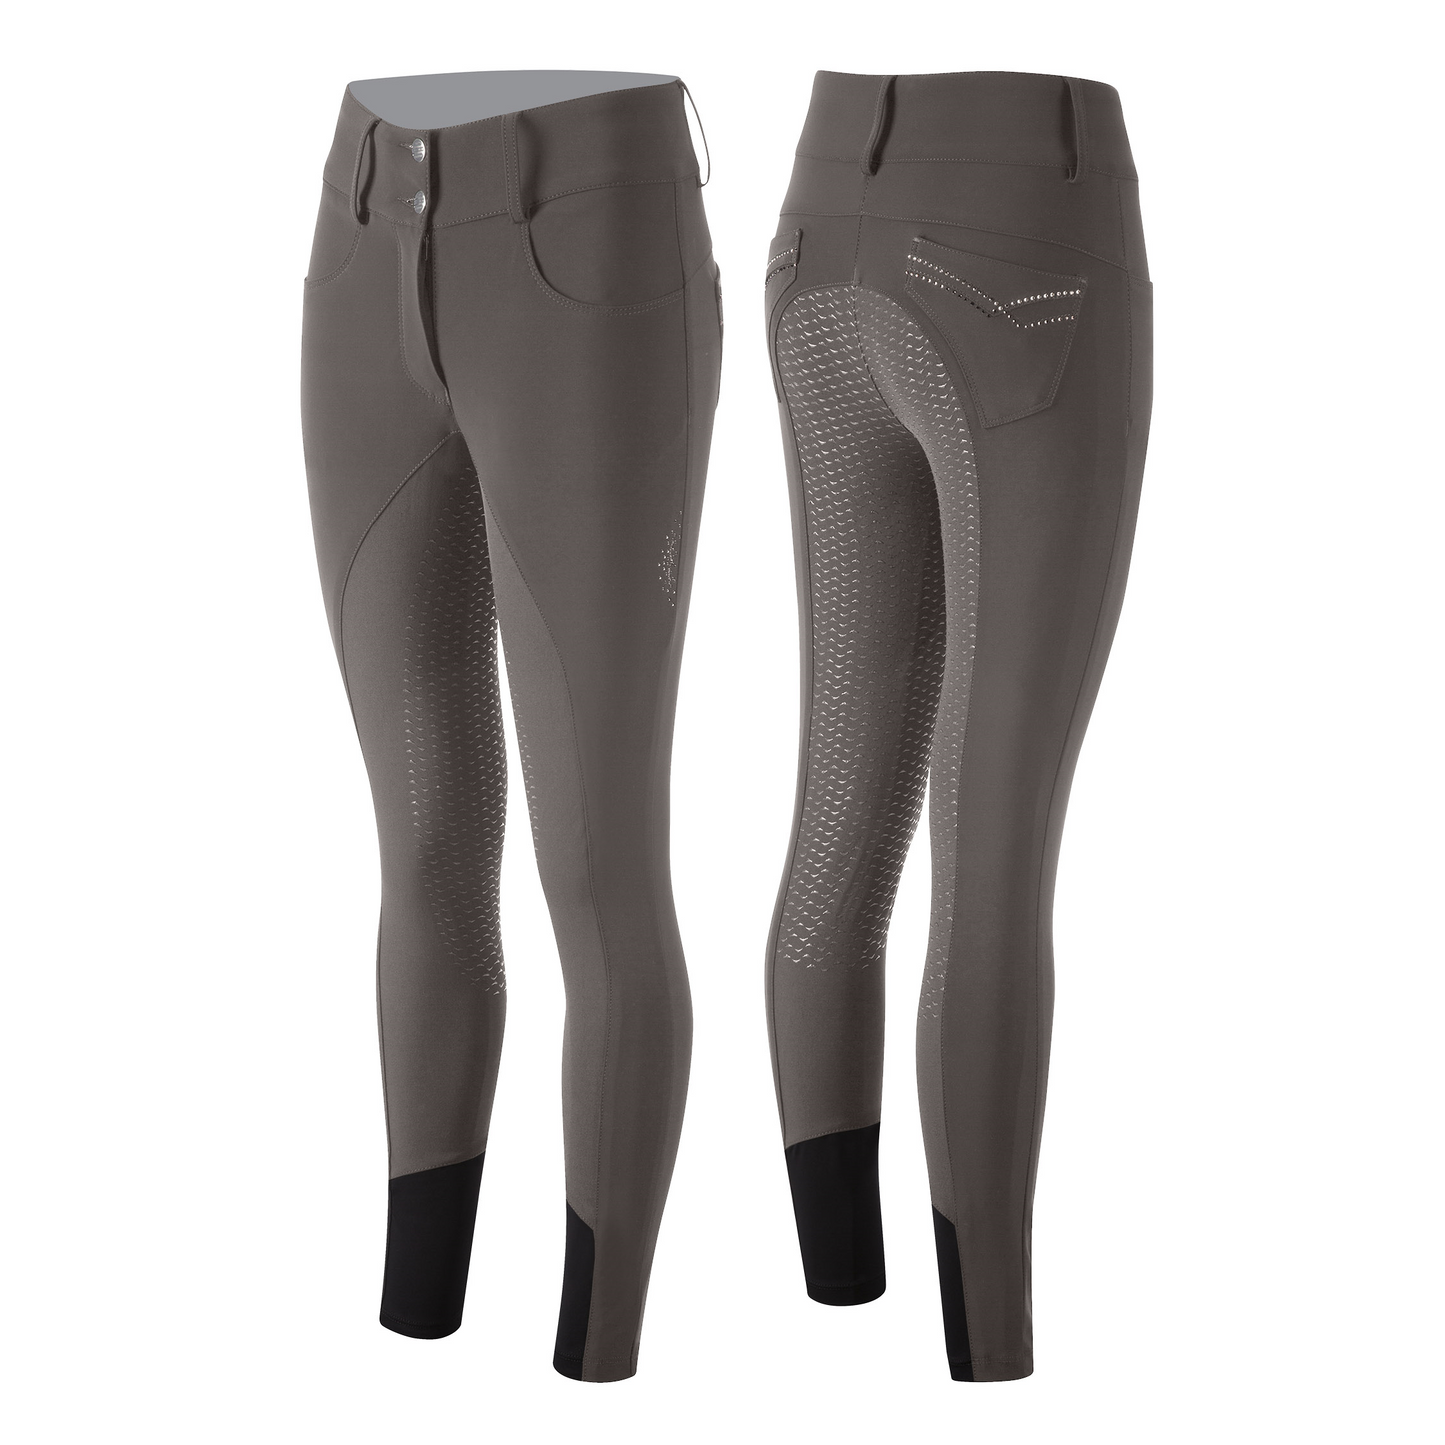 Animo brand riding breeches, gray with grip, front and back view.